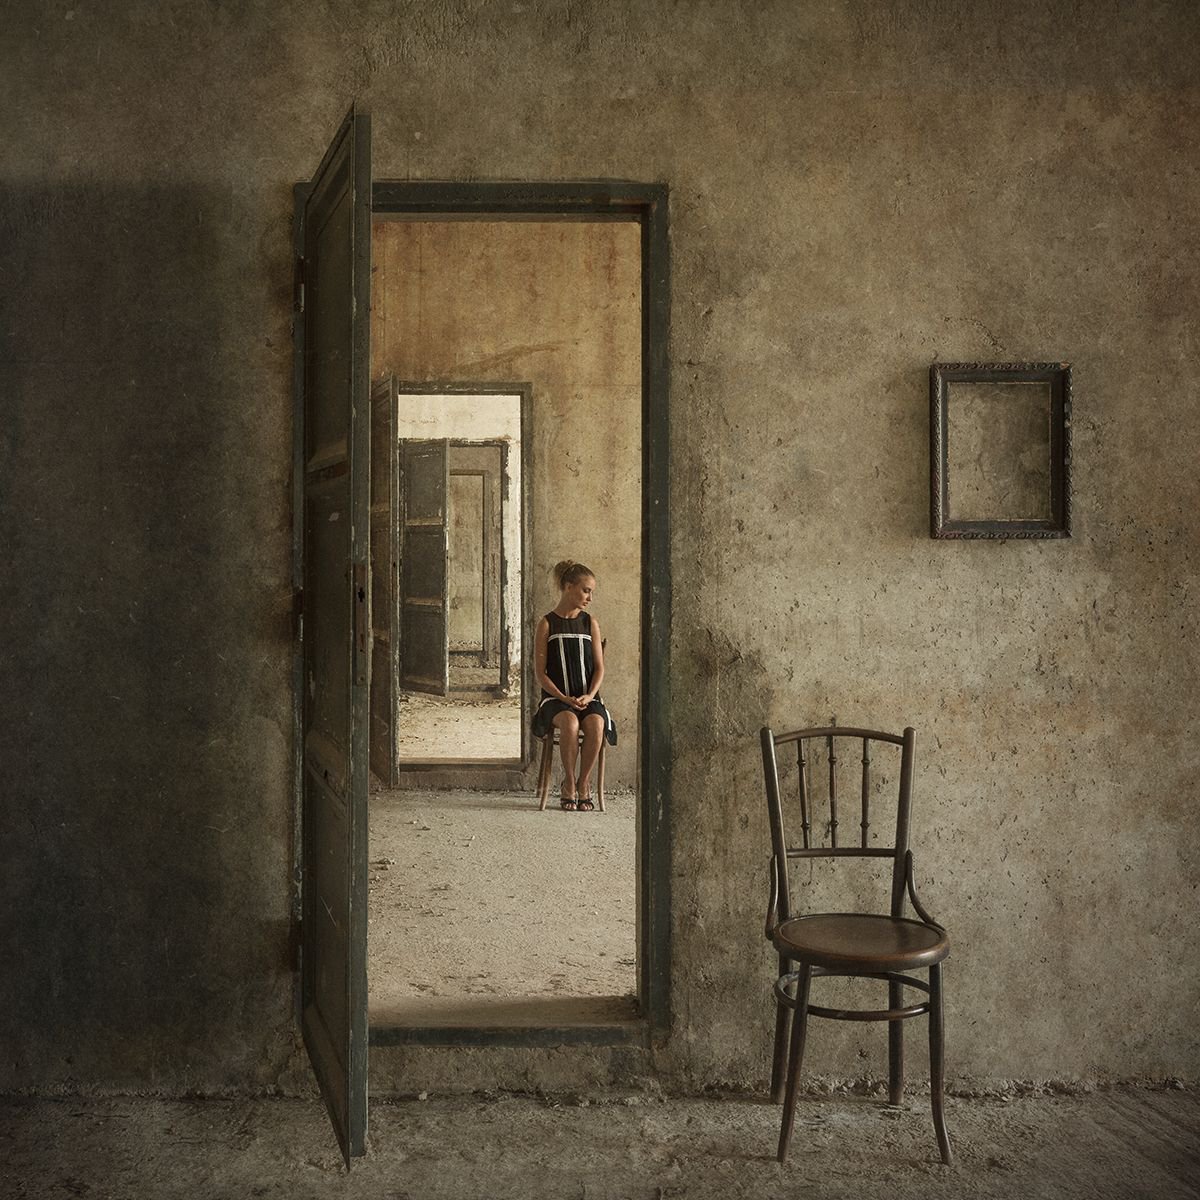 Vilhelm’s rooms I. - SMALL EDITION by Peter Zelei